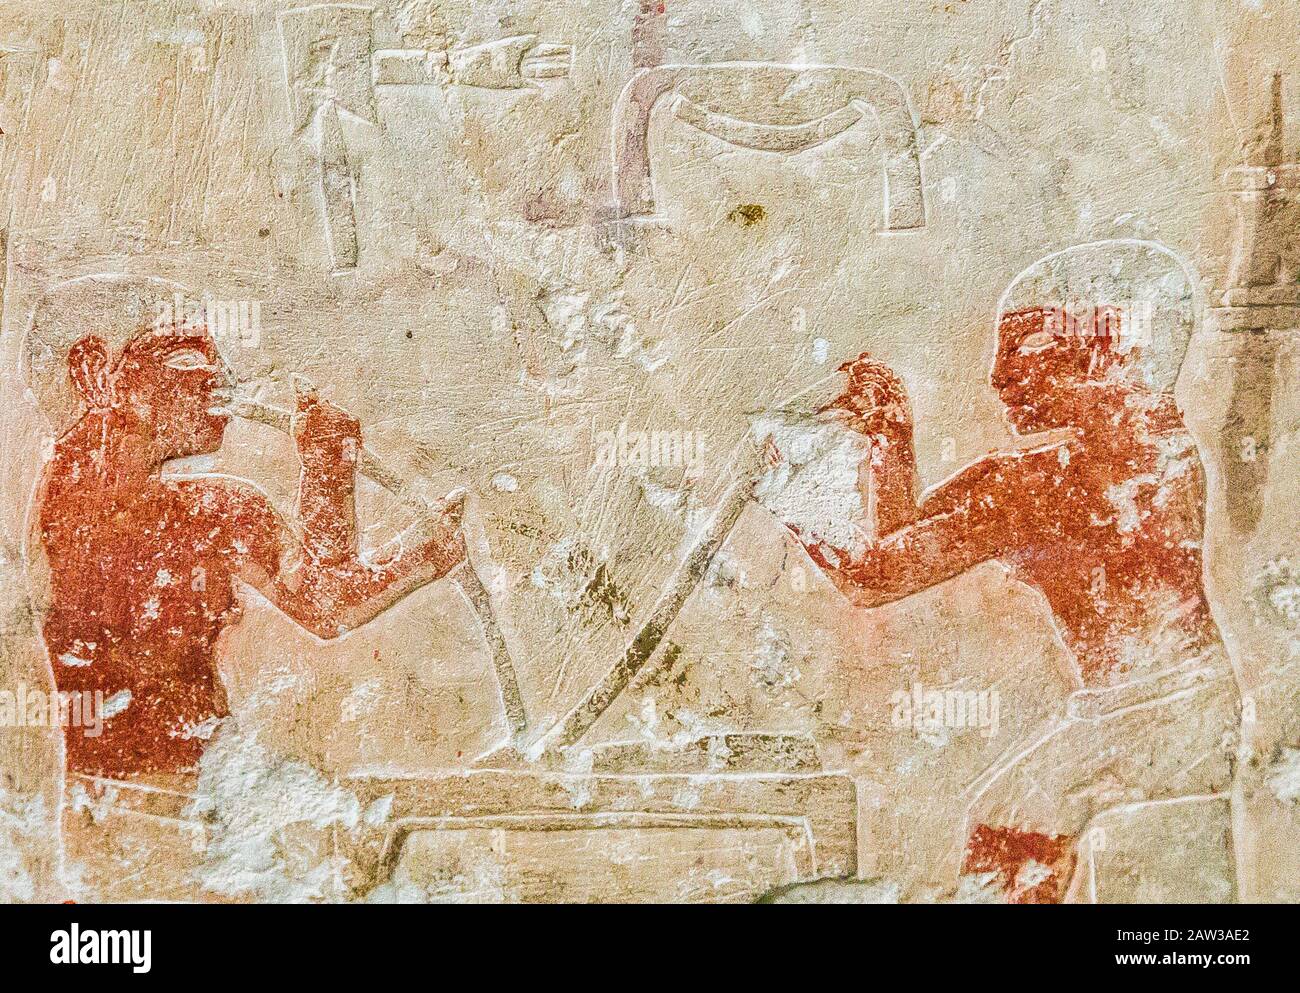 Cairo, Egyptian Museum, from the tomb of Kaemrehu, Saqqara, detail of a relief depicting craftsmen : Dwarf goldsmiths pour gold into a mold. Stock Photo